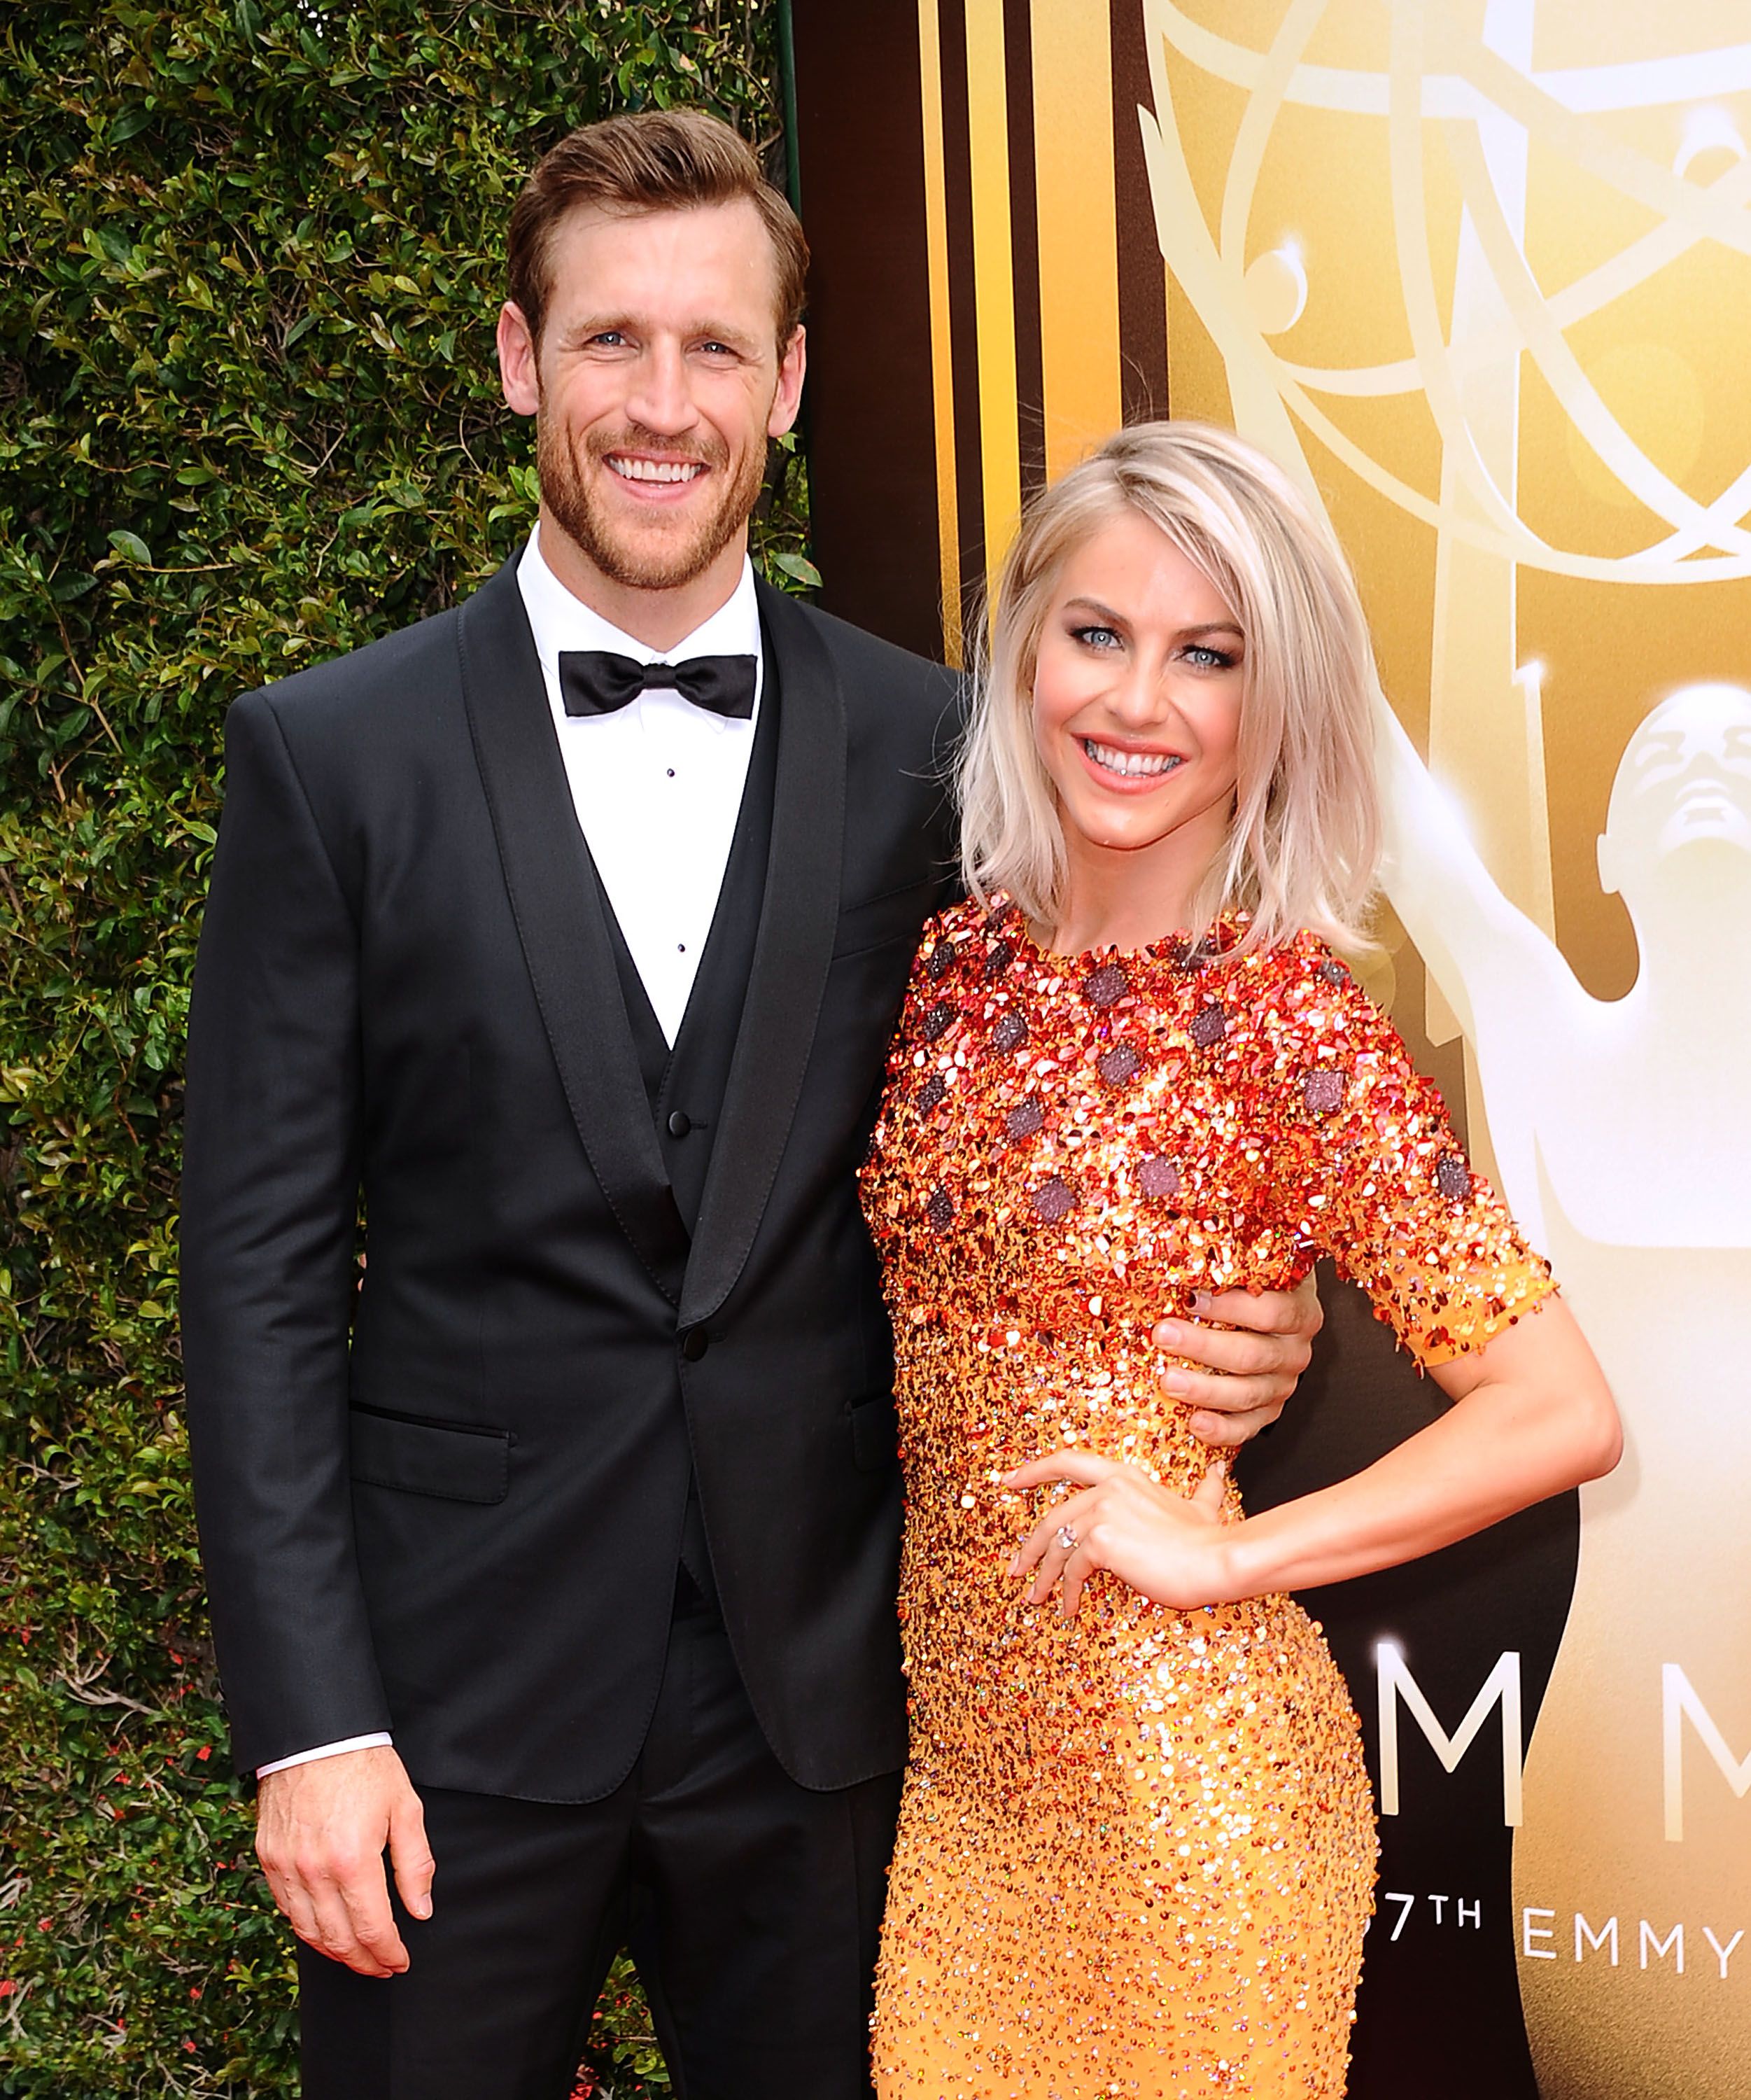 Brooks Laich and Julianne Hough at the 2015 Creative Arts Emmy Awards at Microsoft Theater on September 12, 2015 in Los Angeles, California | Photo: Getty Images 